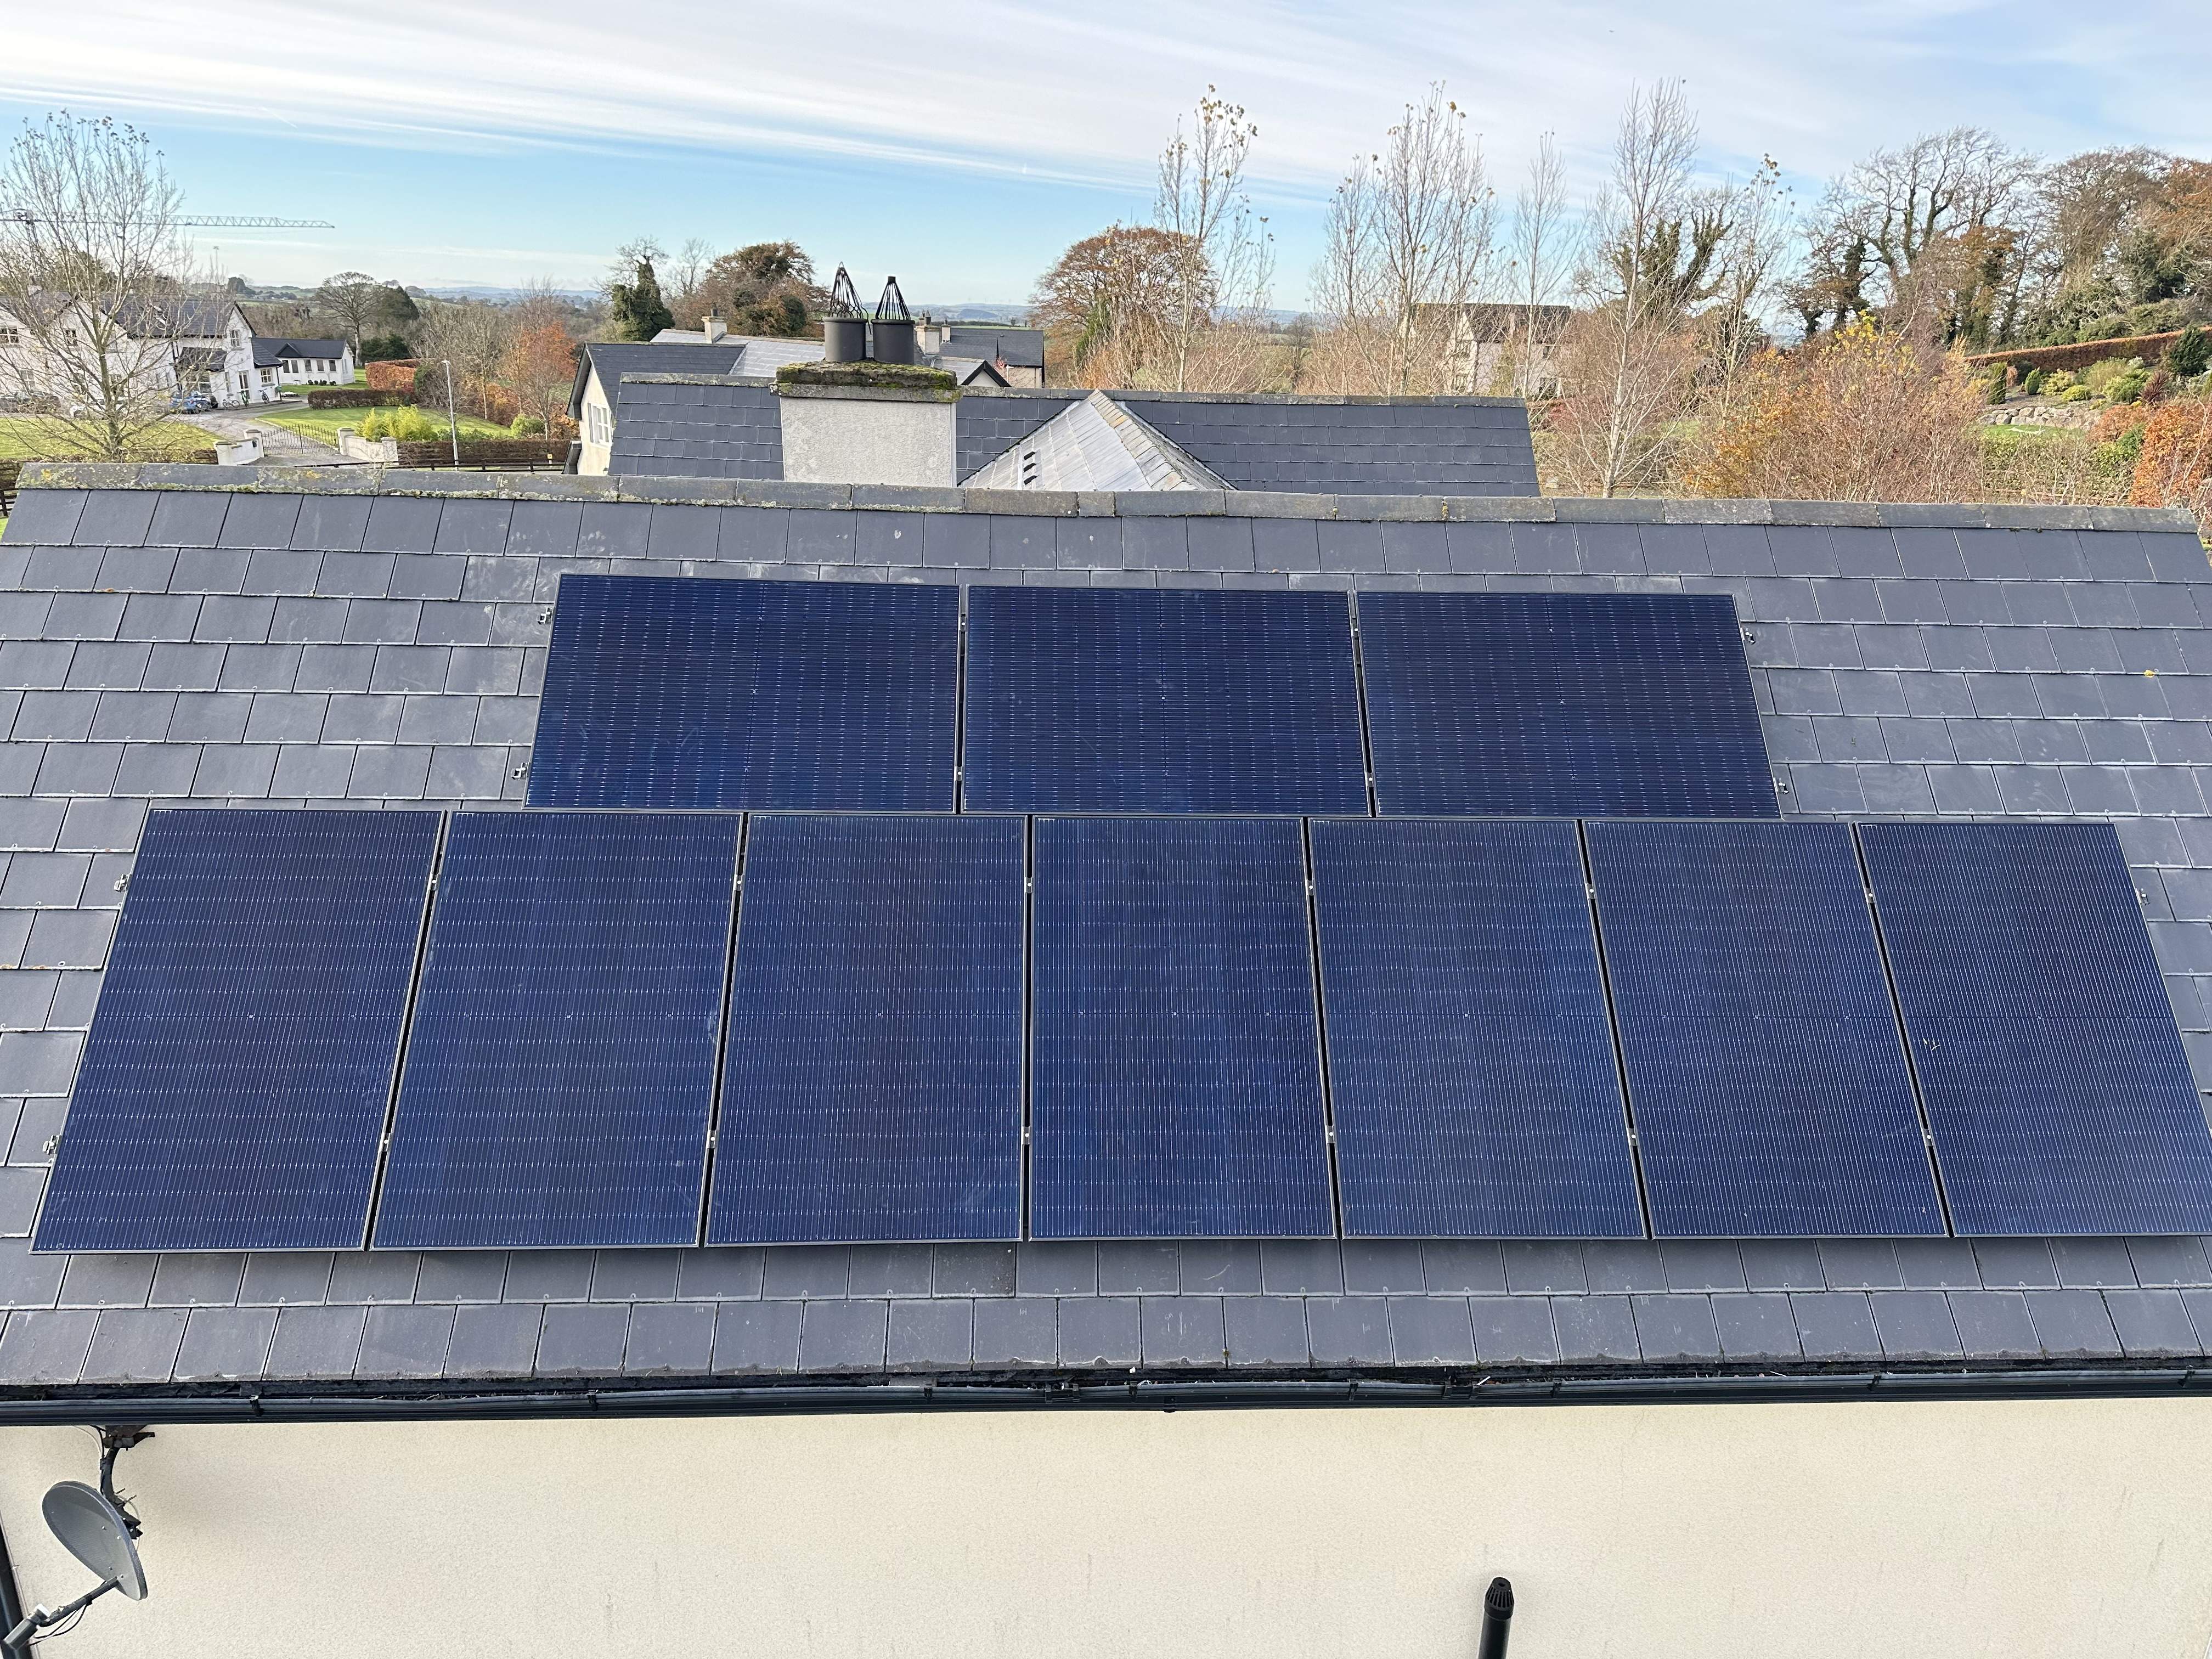 South/South East 7.3Kw System